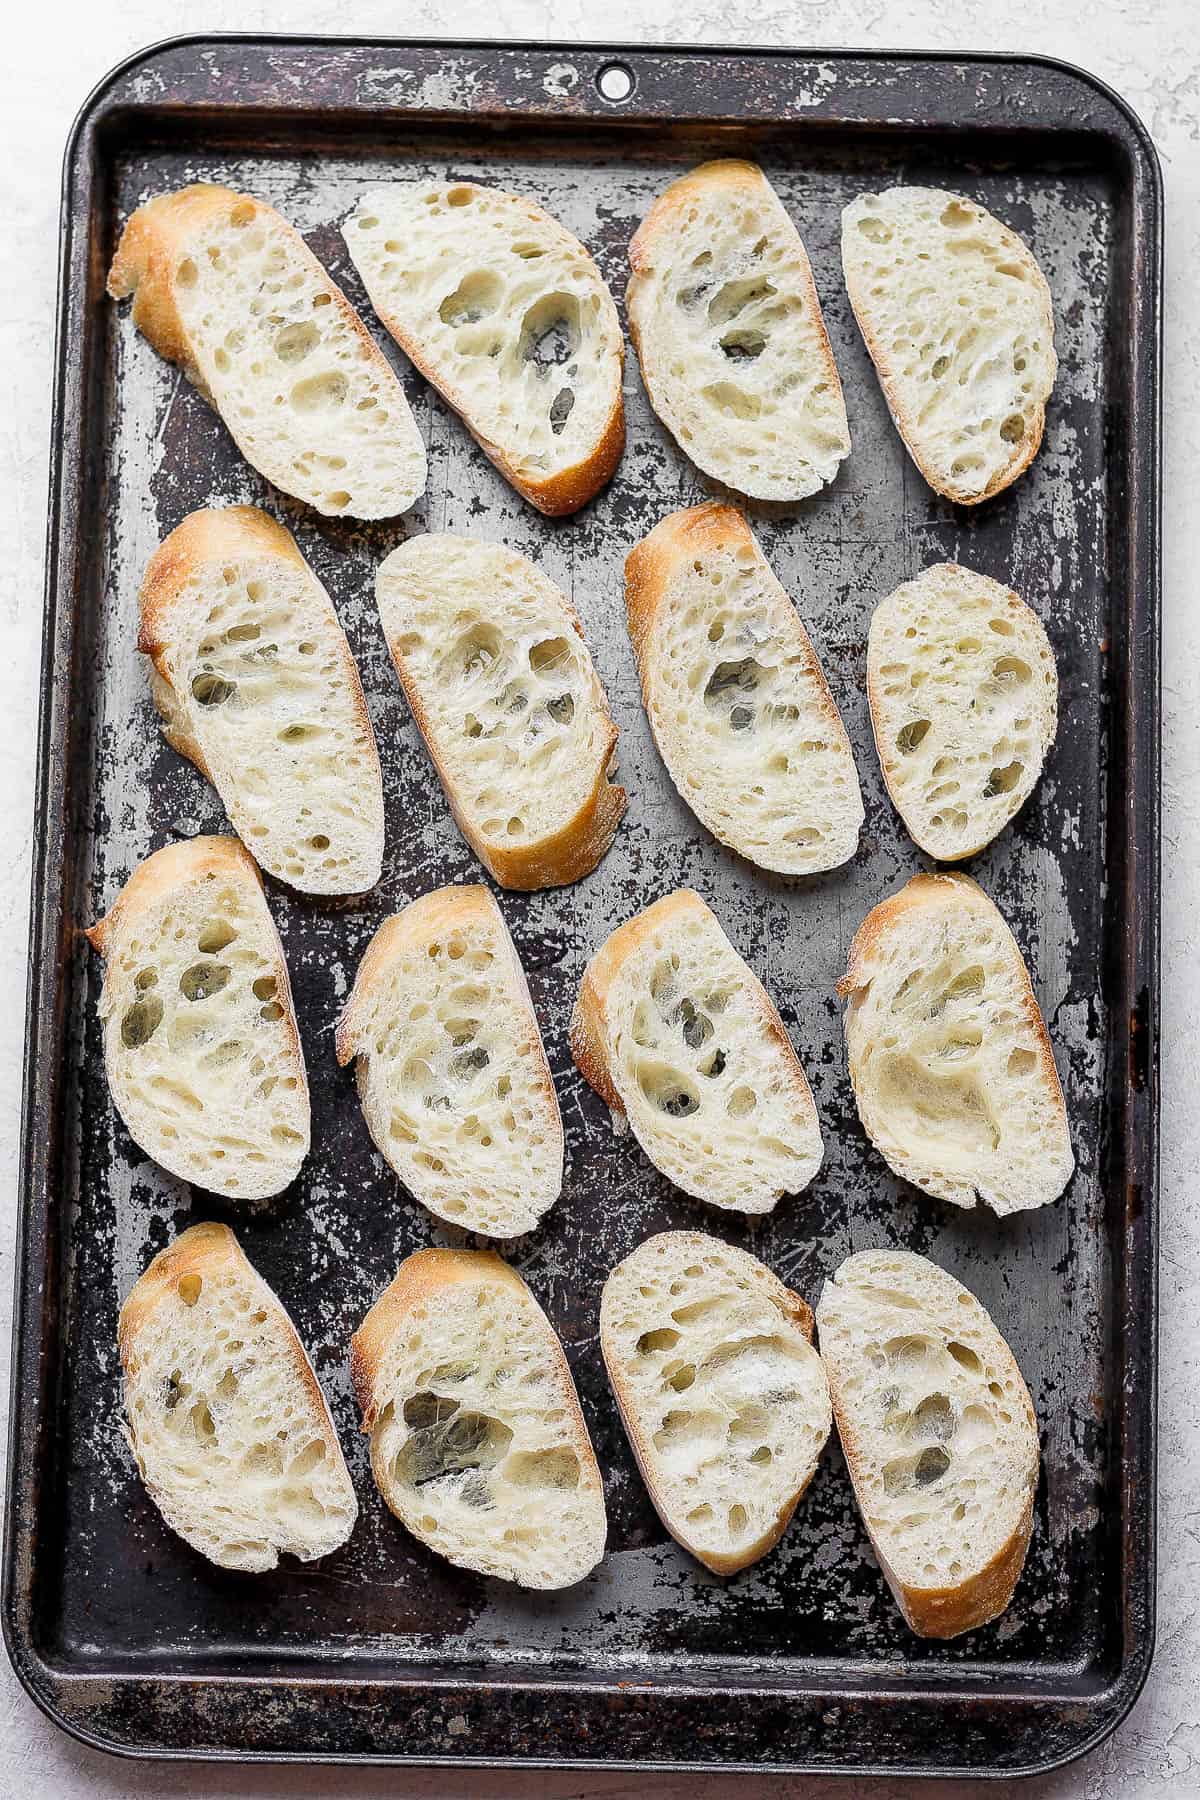 16 pieces of sliced baguette on a baking sheet.